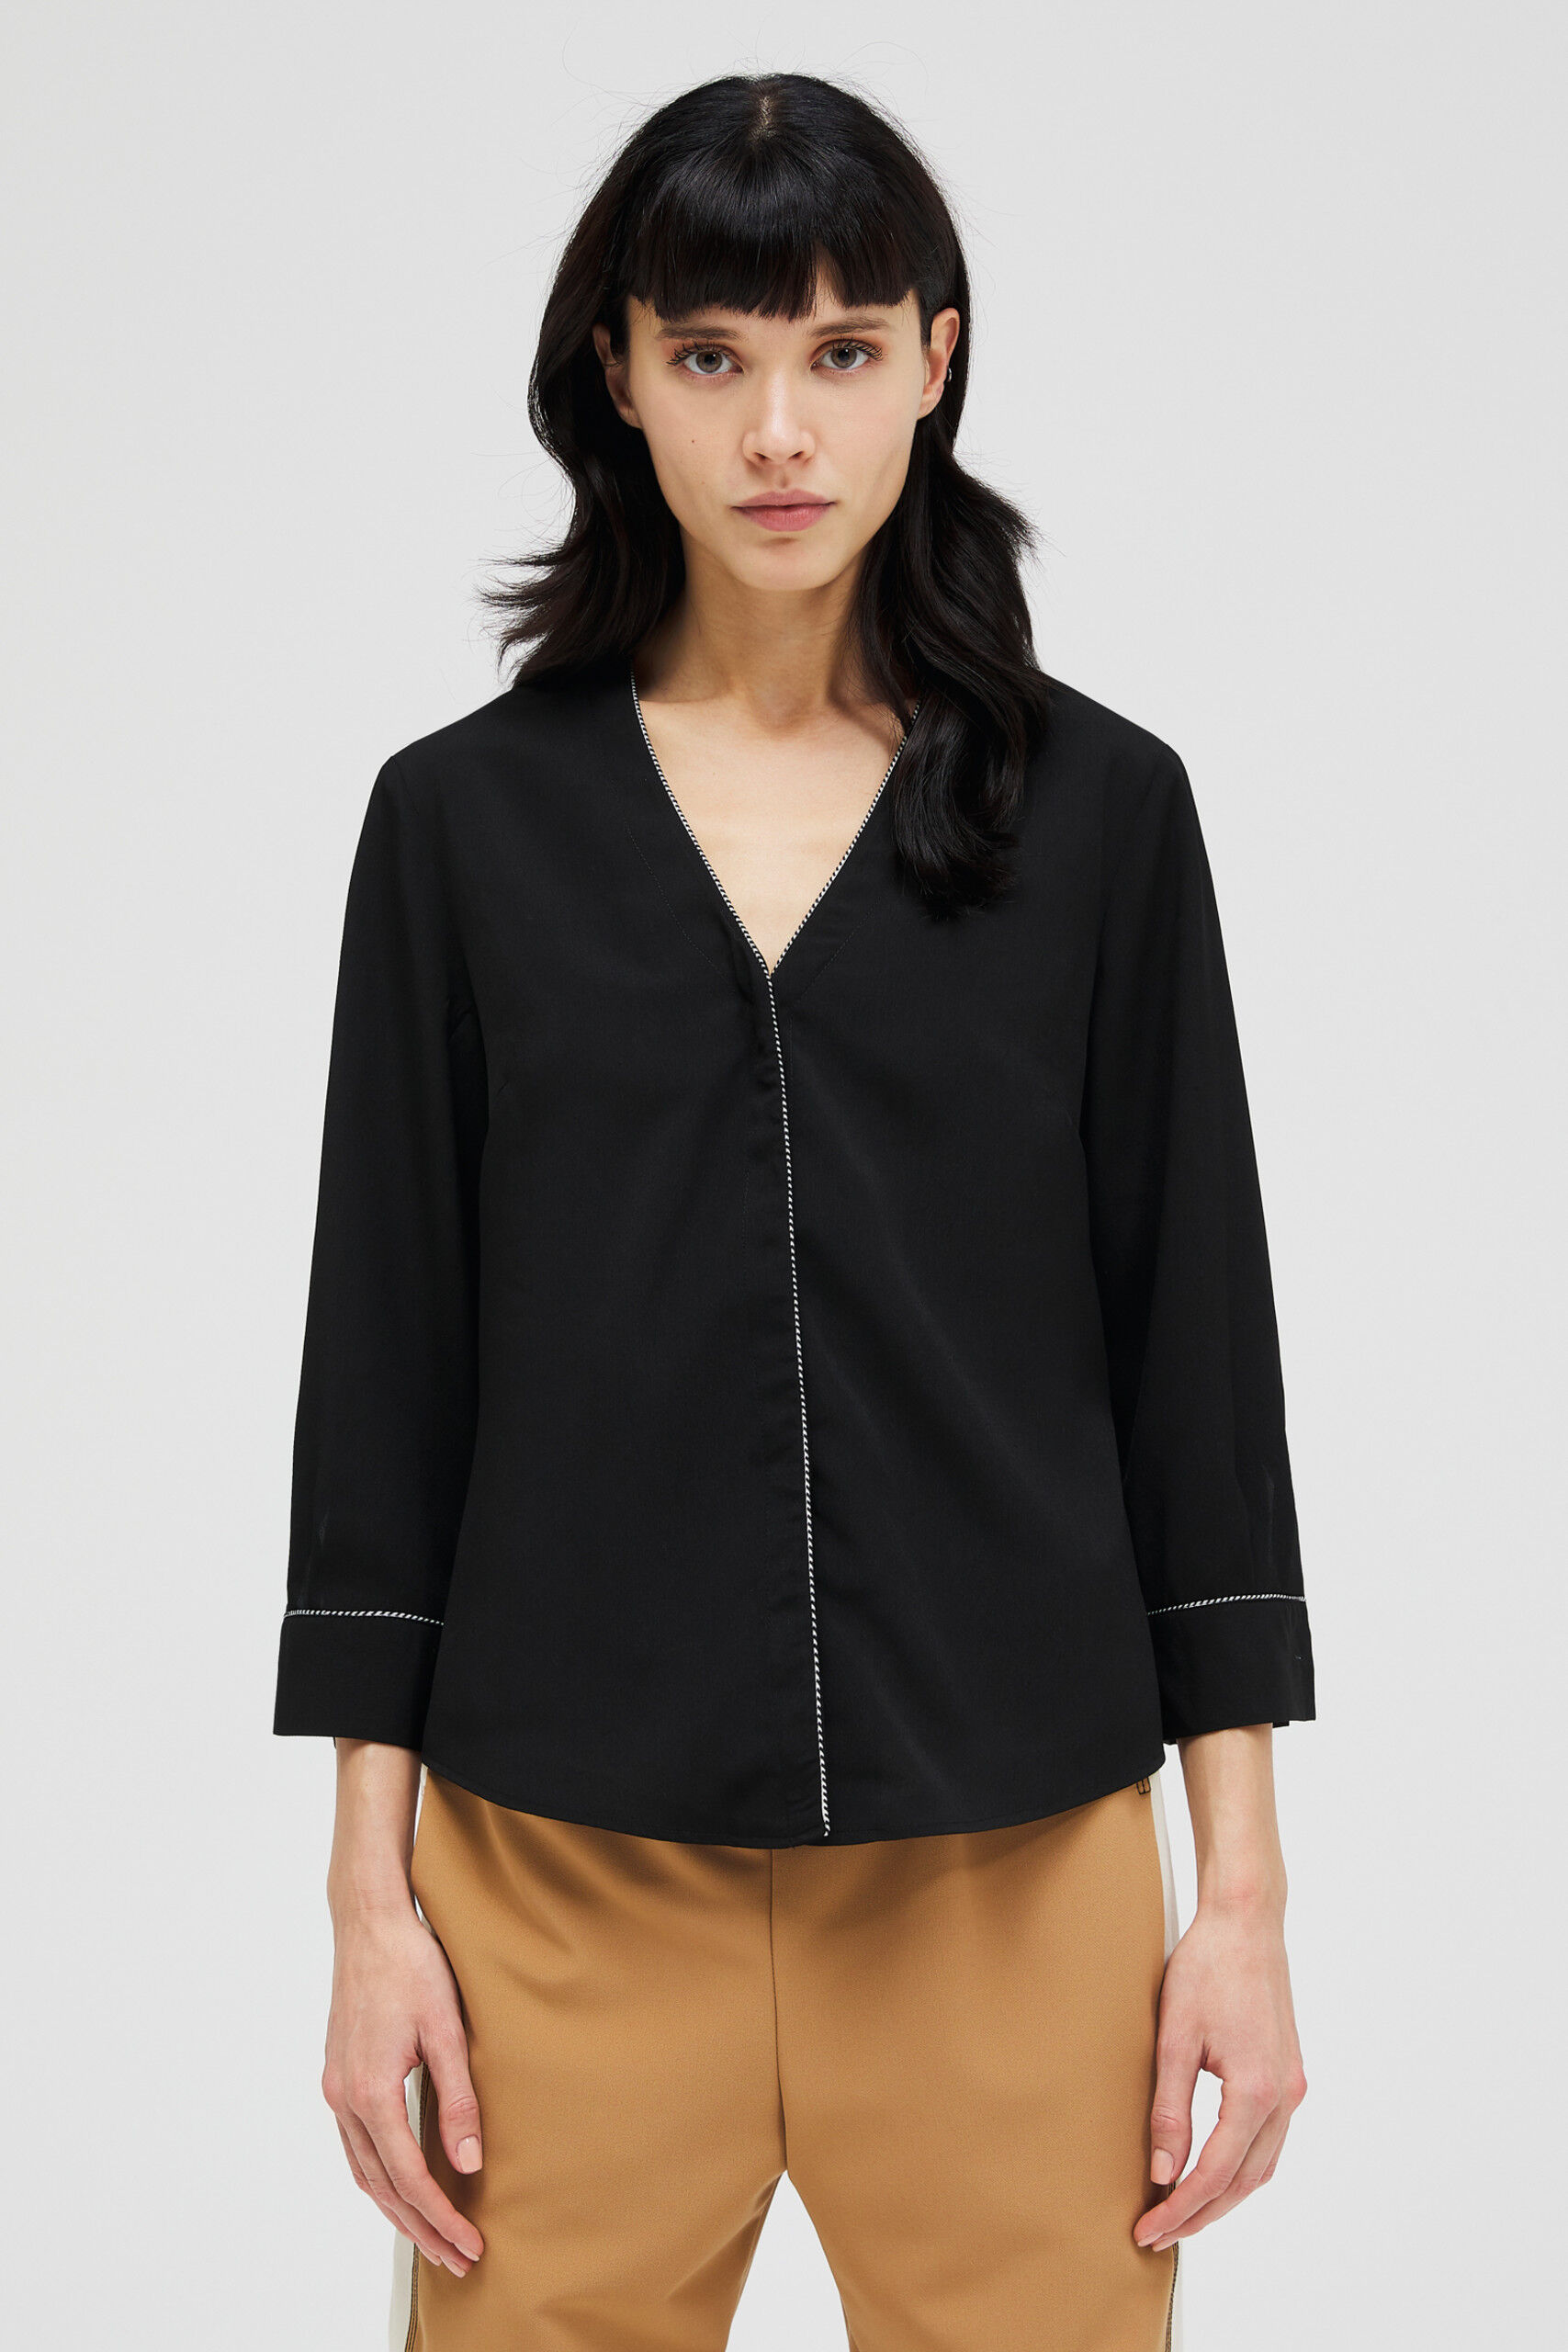 Women's Shirts and Blouses Collection 2021 | Sisley